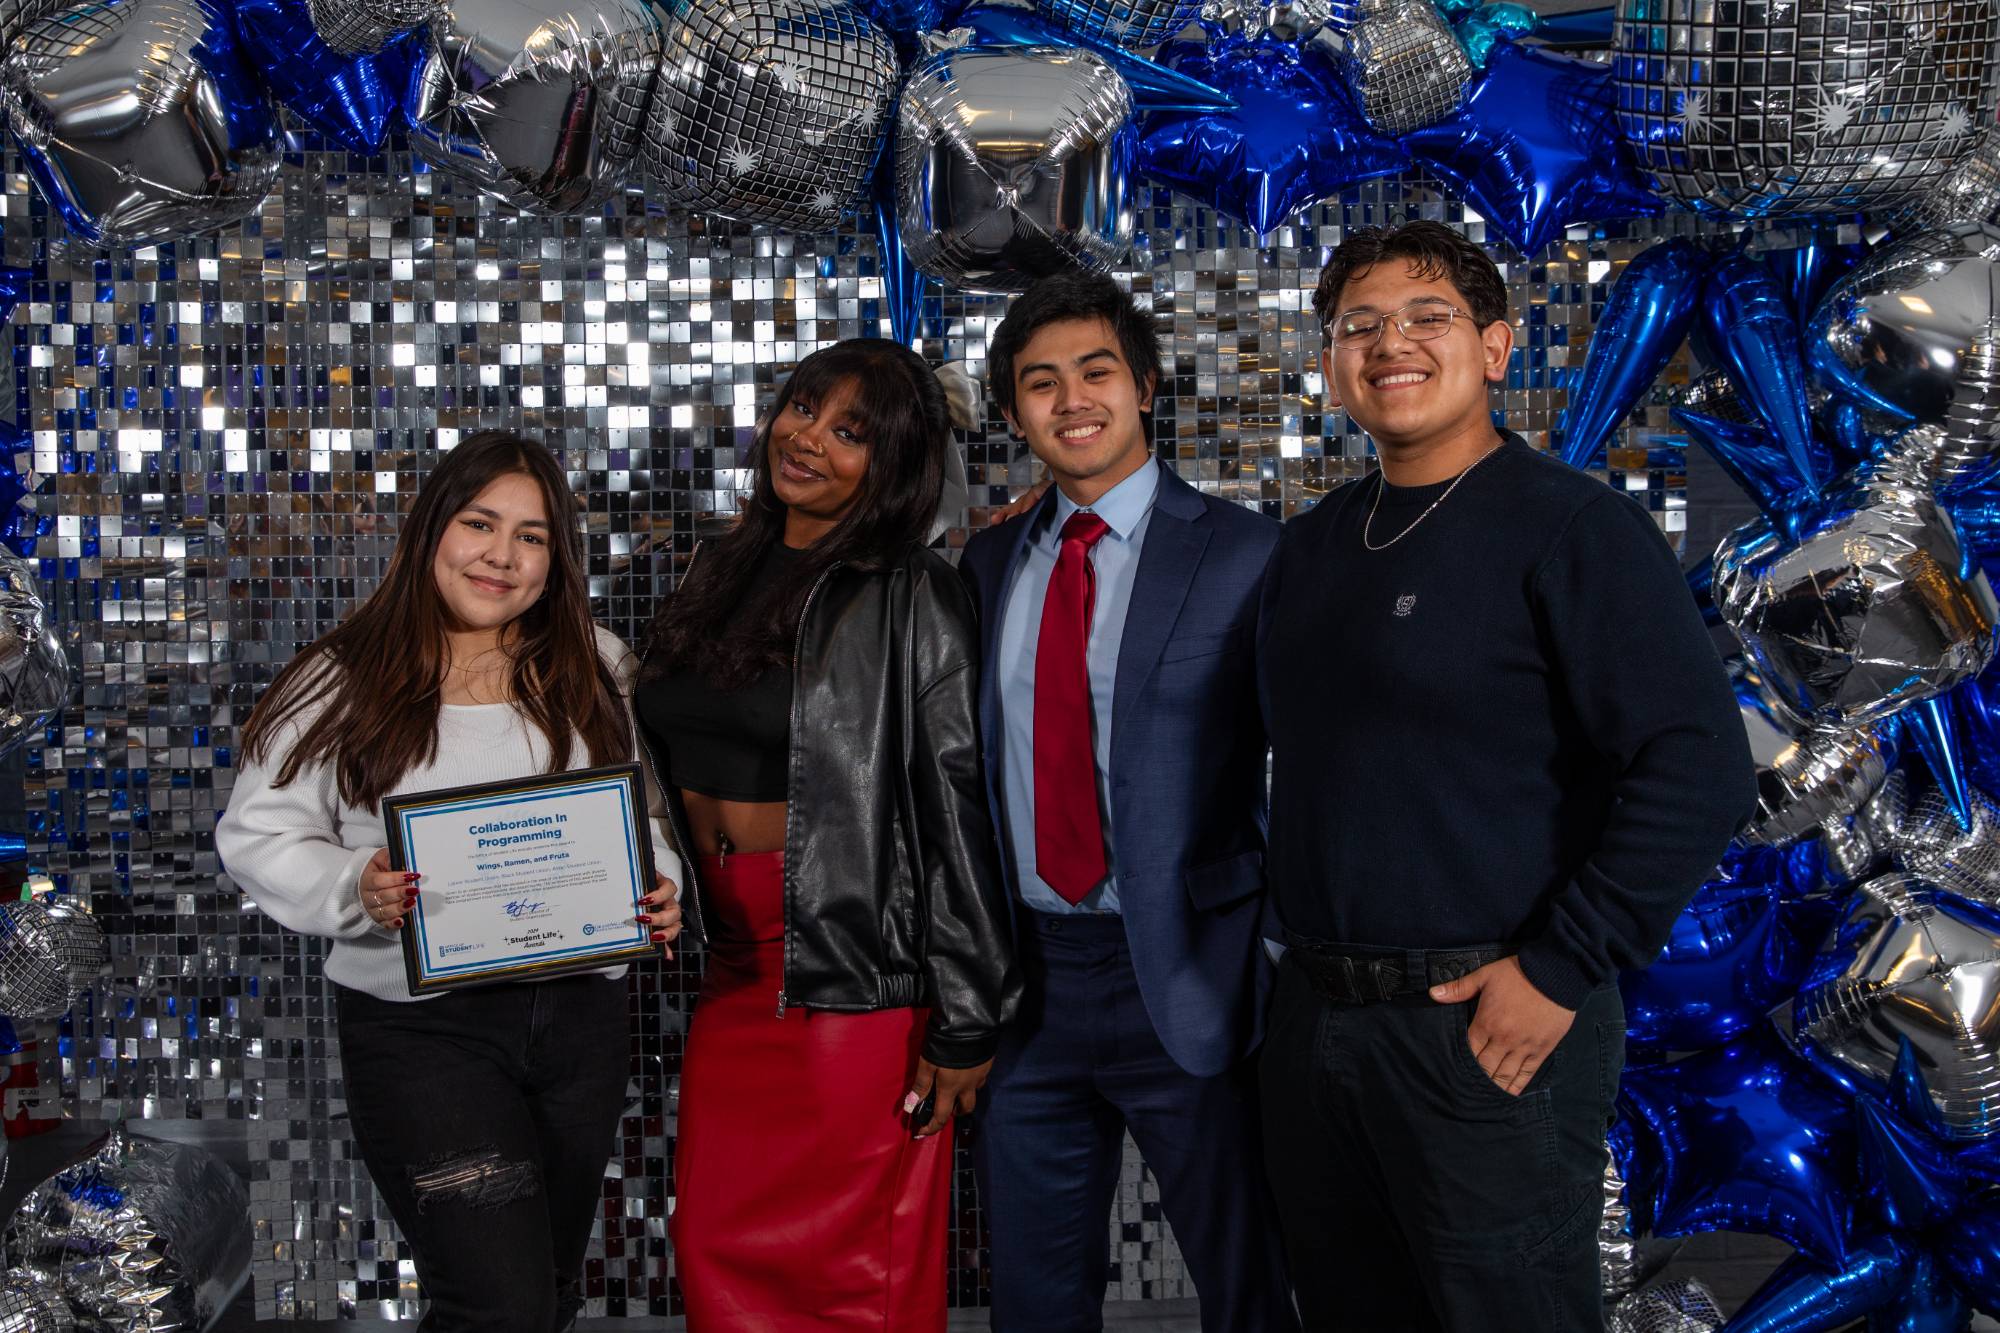 Latino Student Union, Black Student Union, and Asian Student Union with their award